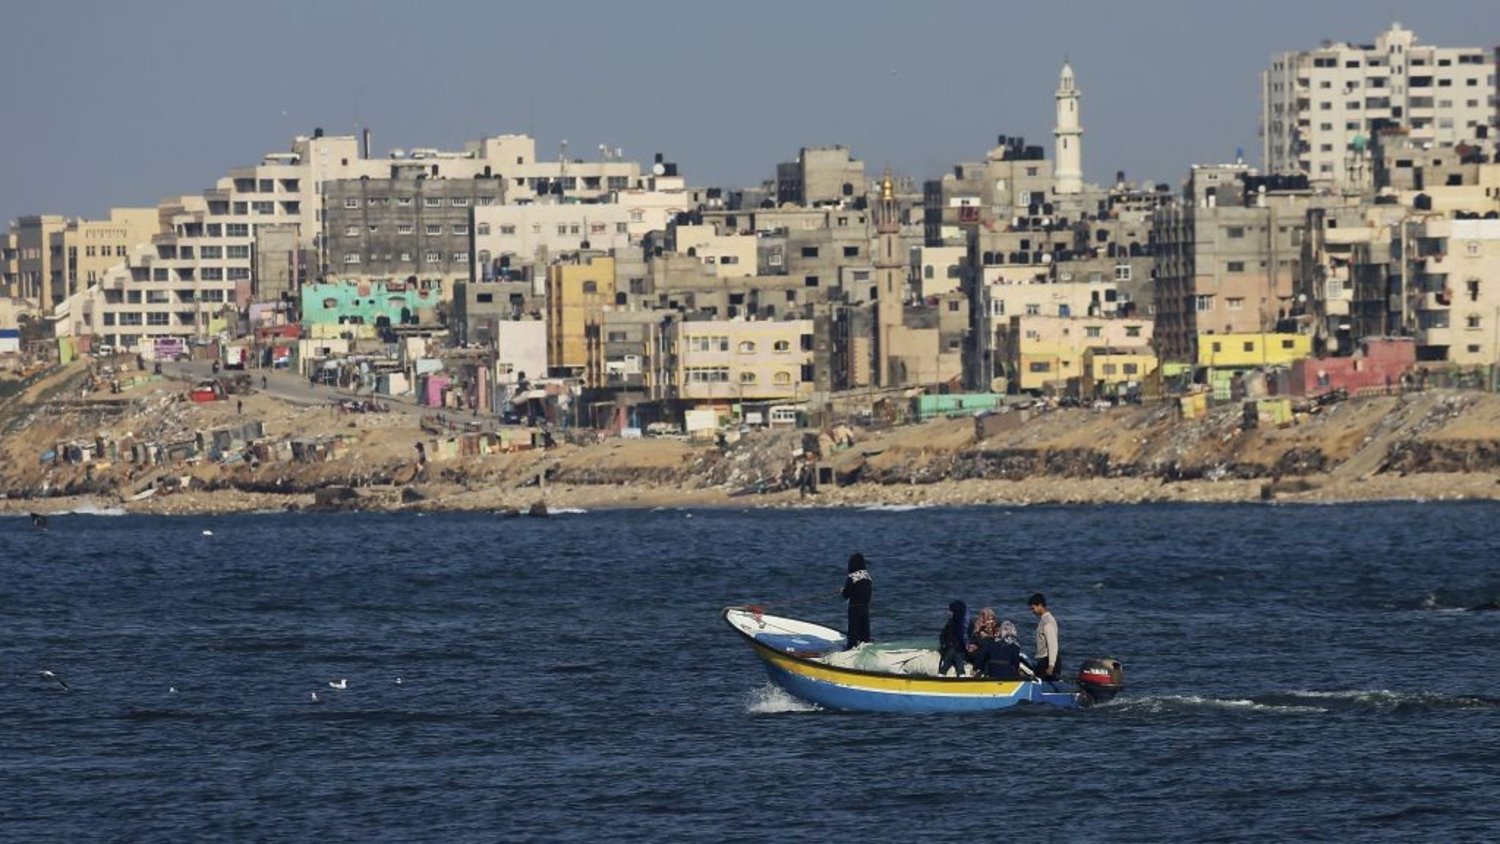 Palestinian fishermen on a boat off the coast of the Gaza Strip, February 9, 2016. (AP)